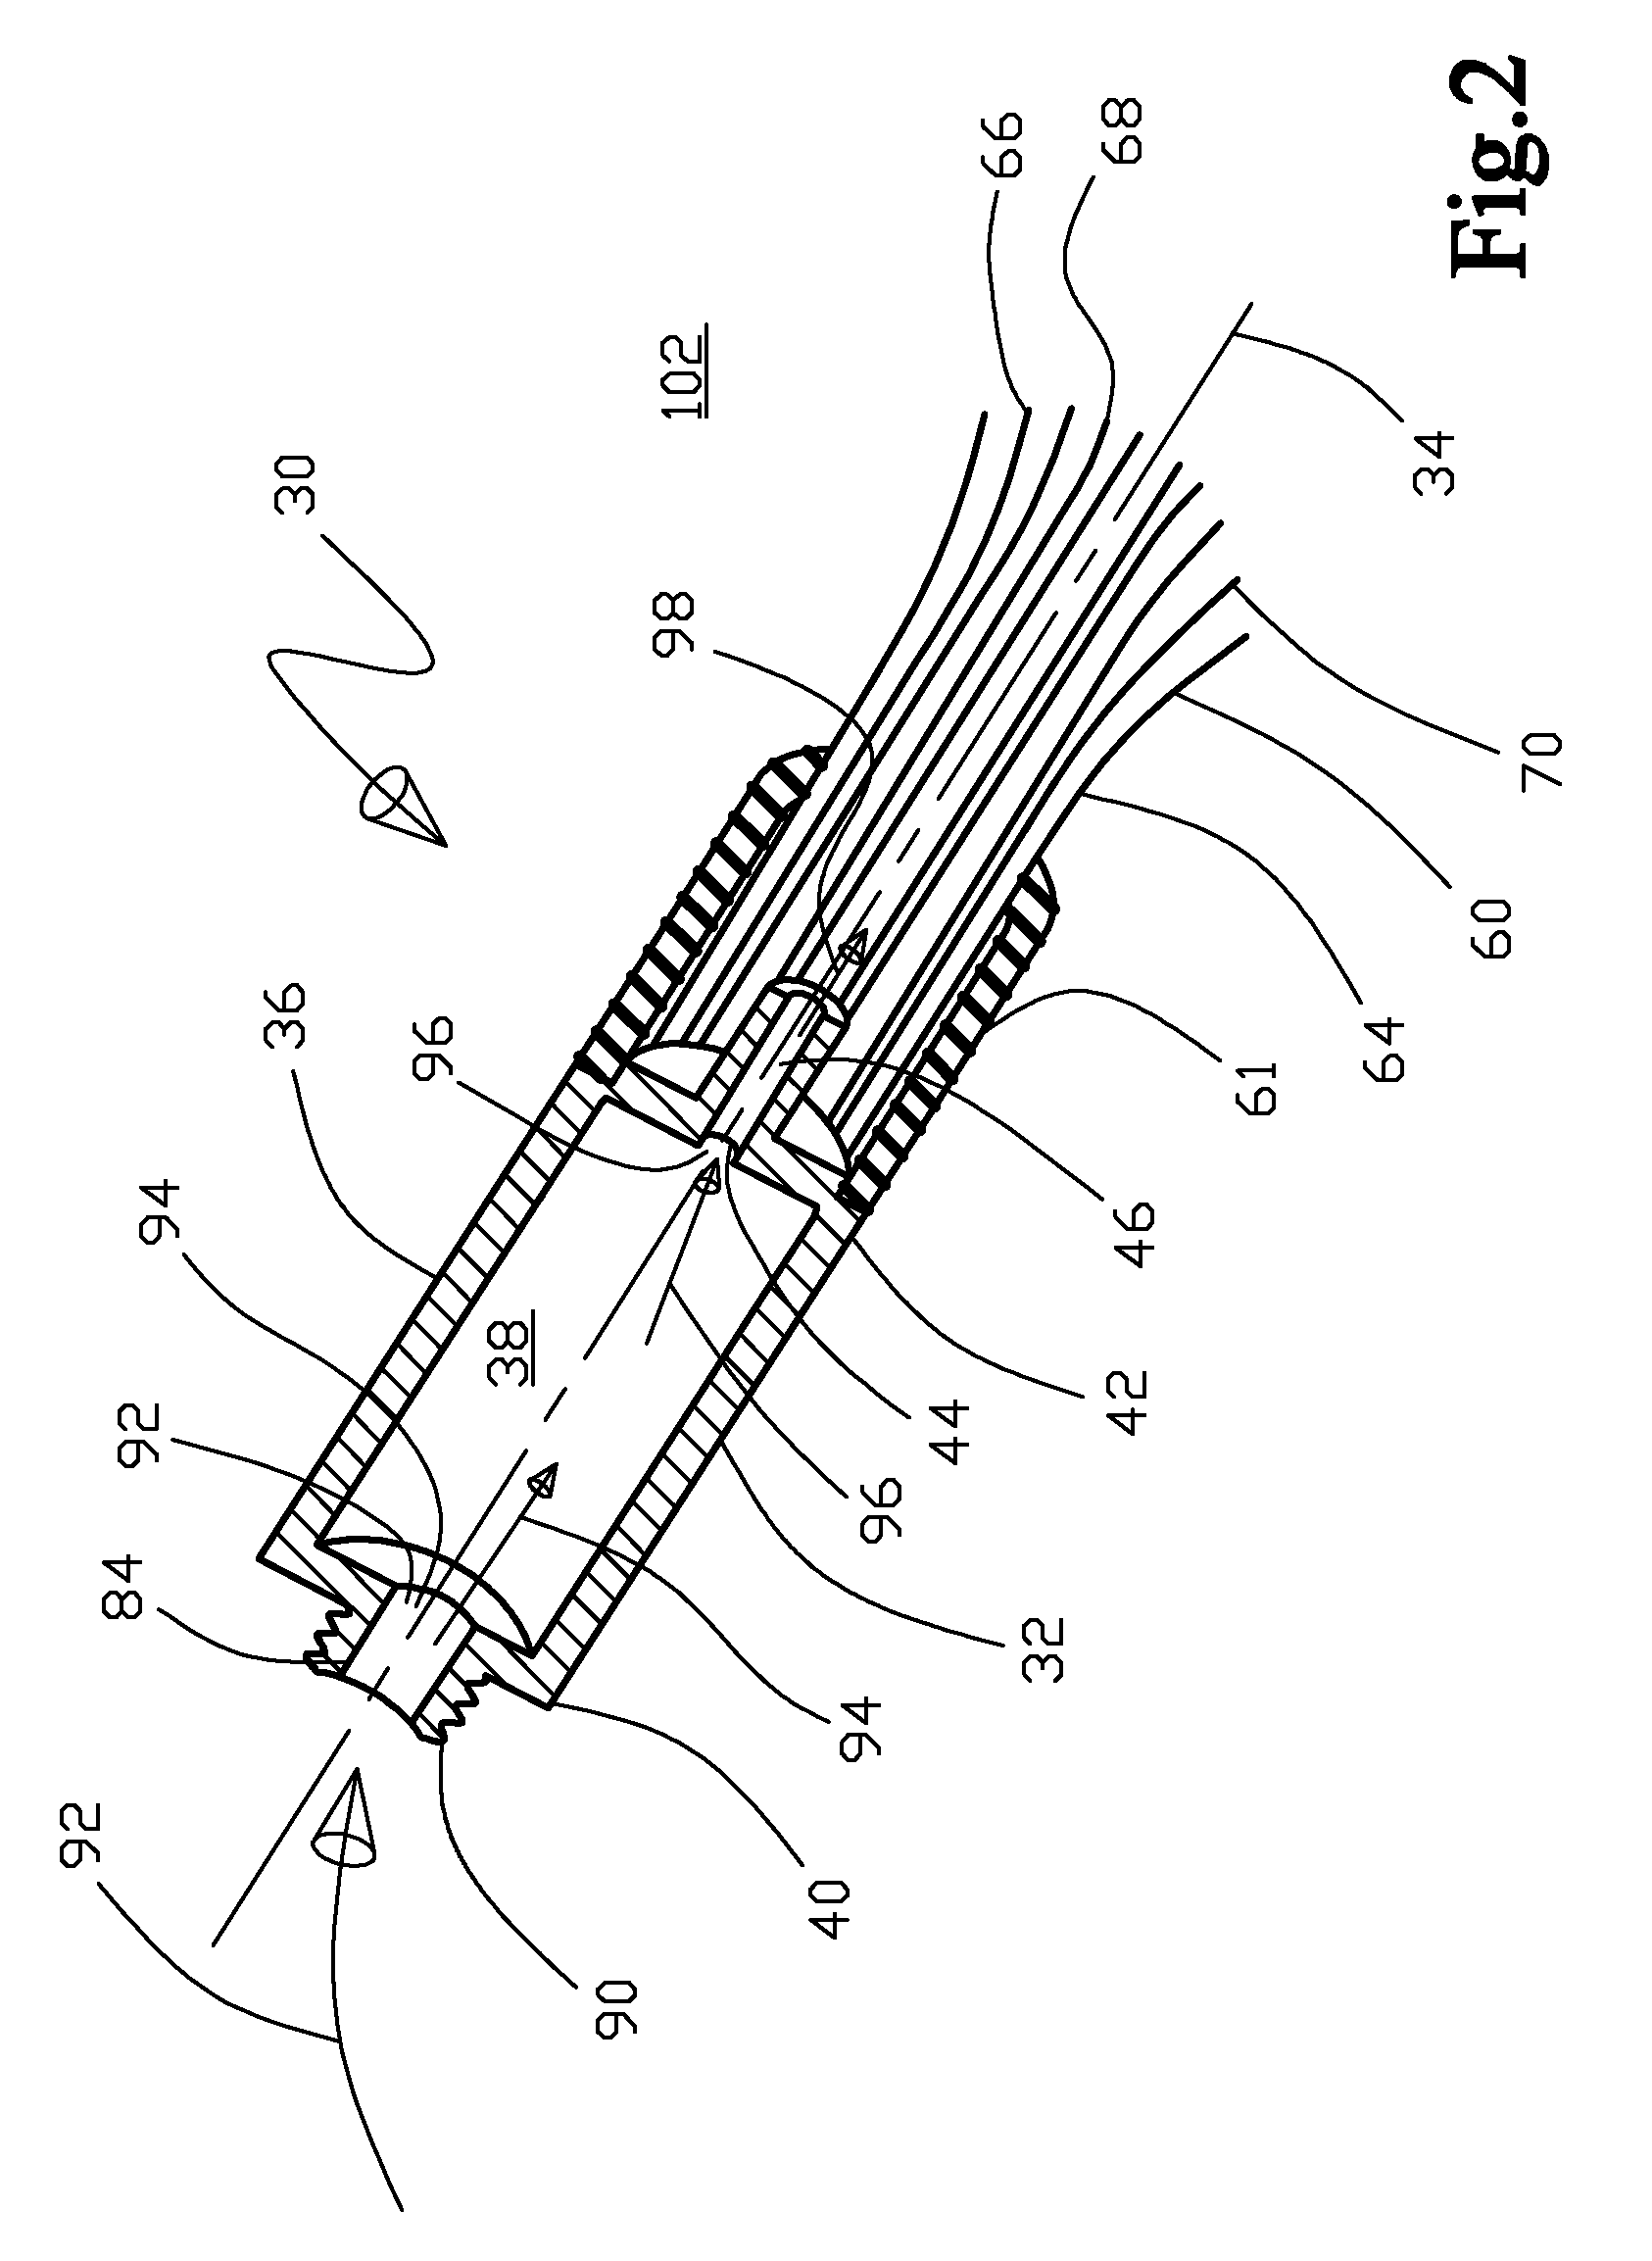 Fluid Cleaning Apparatus